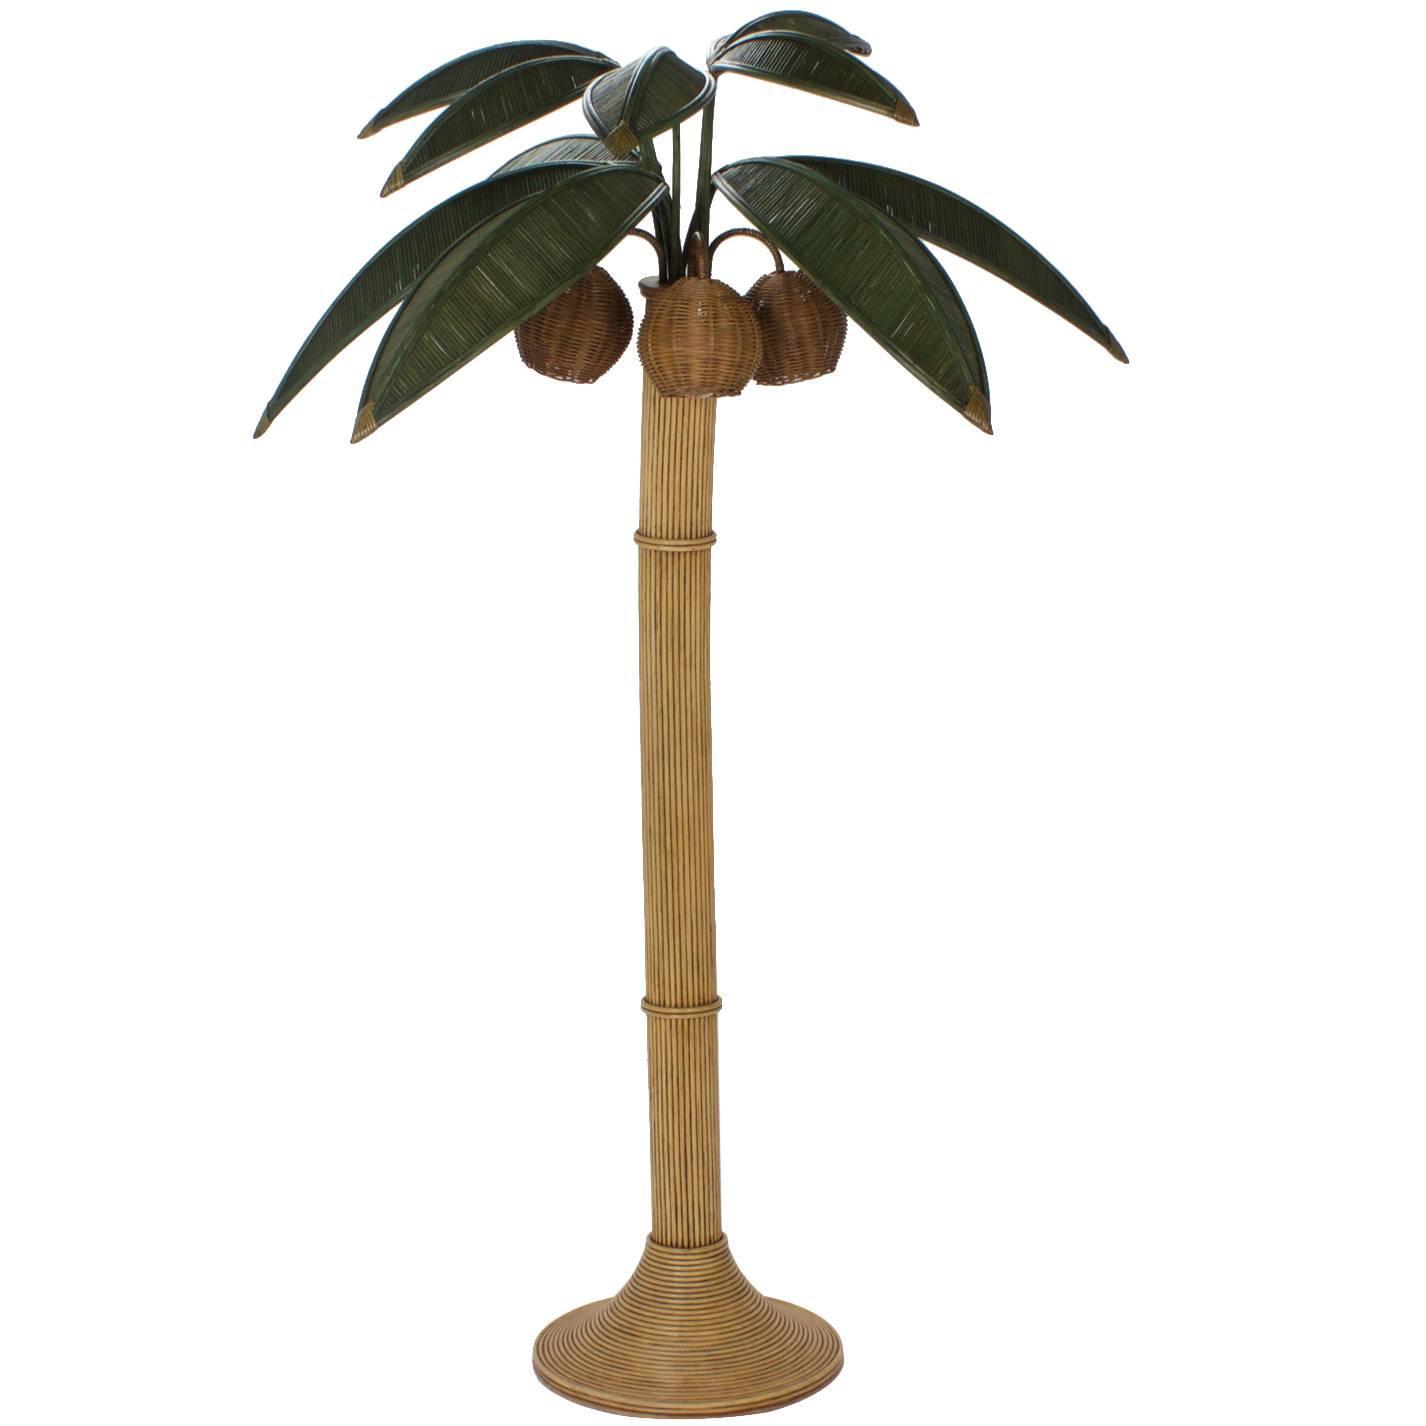 Stylized Reed Palm Tree Floor Lamp For Sale at 1stdibs